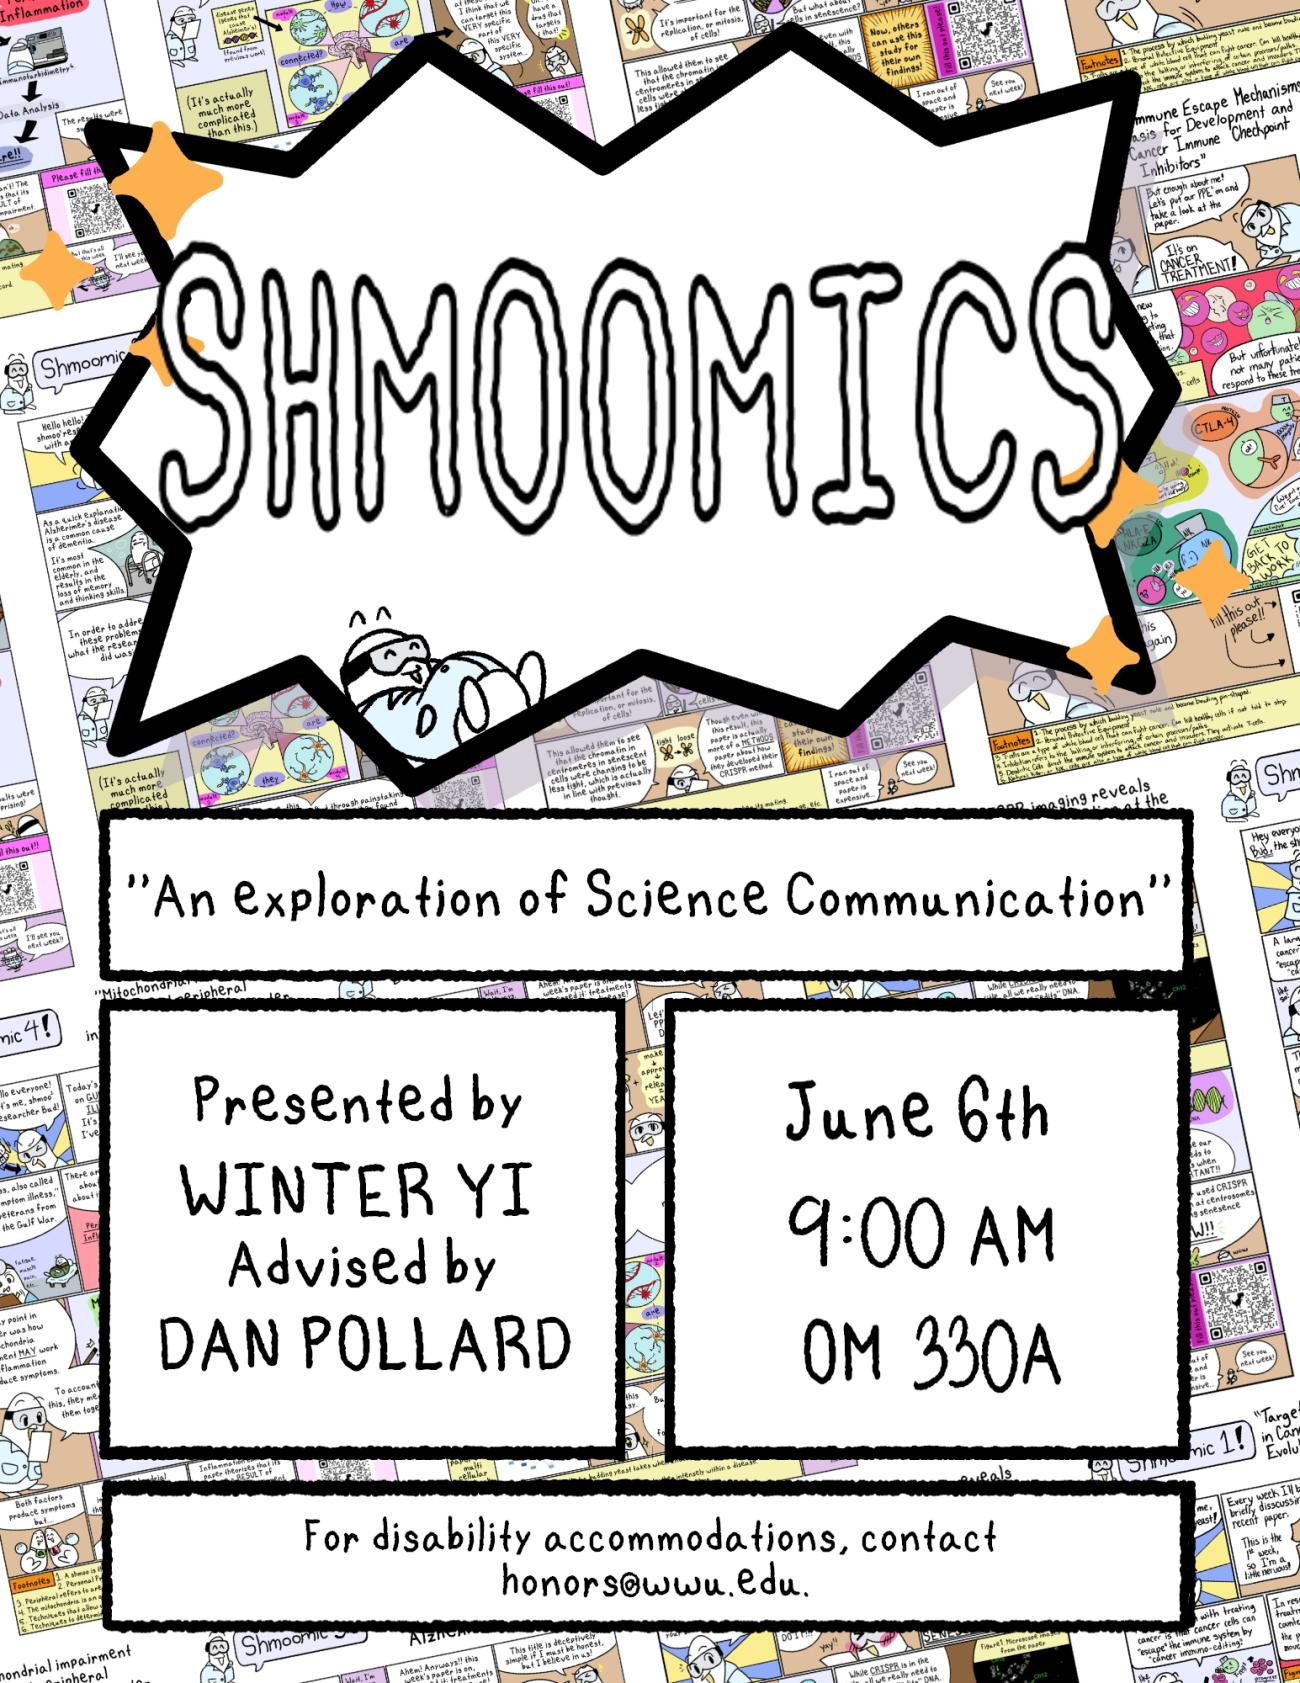 A mostly white poster with tilted, multi-colored comics in the background. Text reads "Shmoomics: An Exploration of Science Communication. Presented by Winter Yi, Advised by Dan Pollard. June 6th, 9AM at Old Main 330A. For disability accommodations, contact honors@wwu.edu."